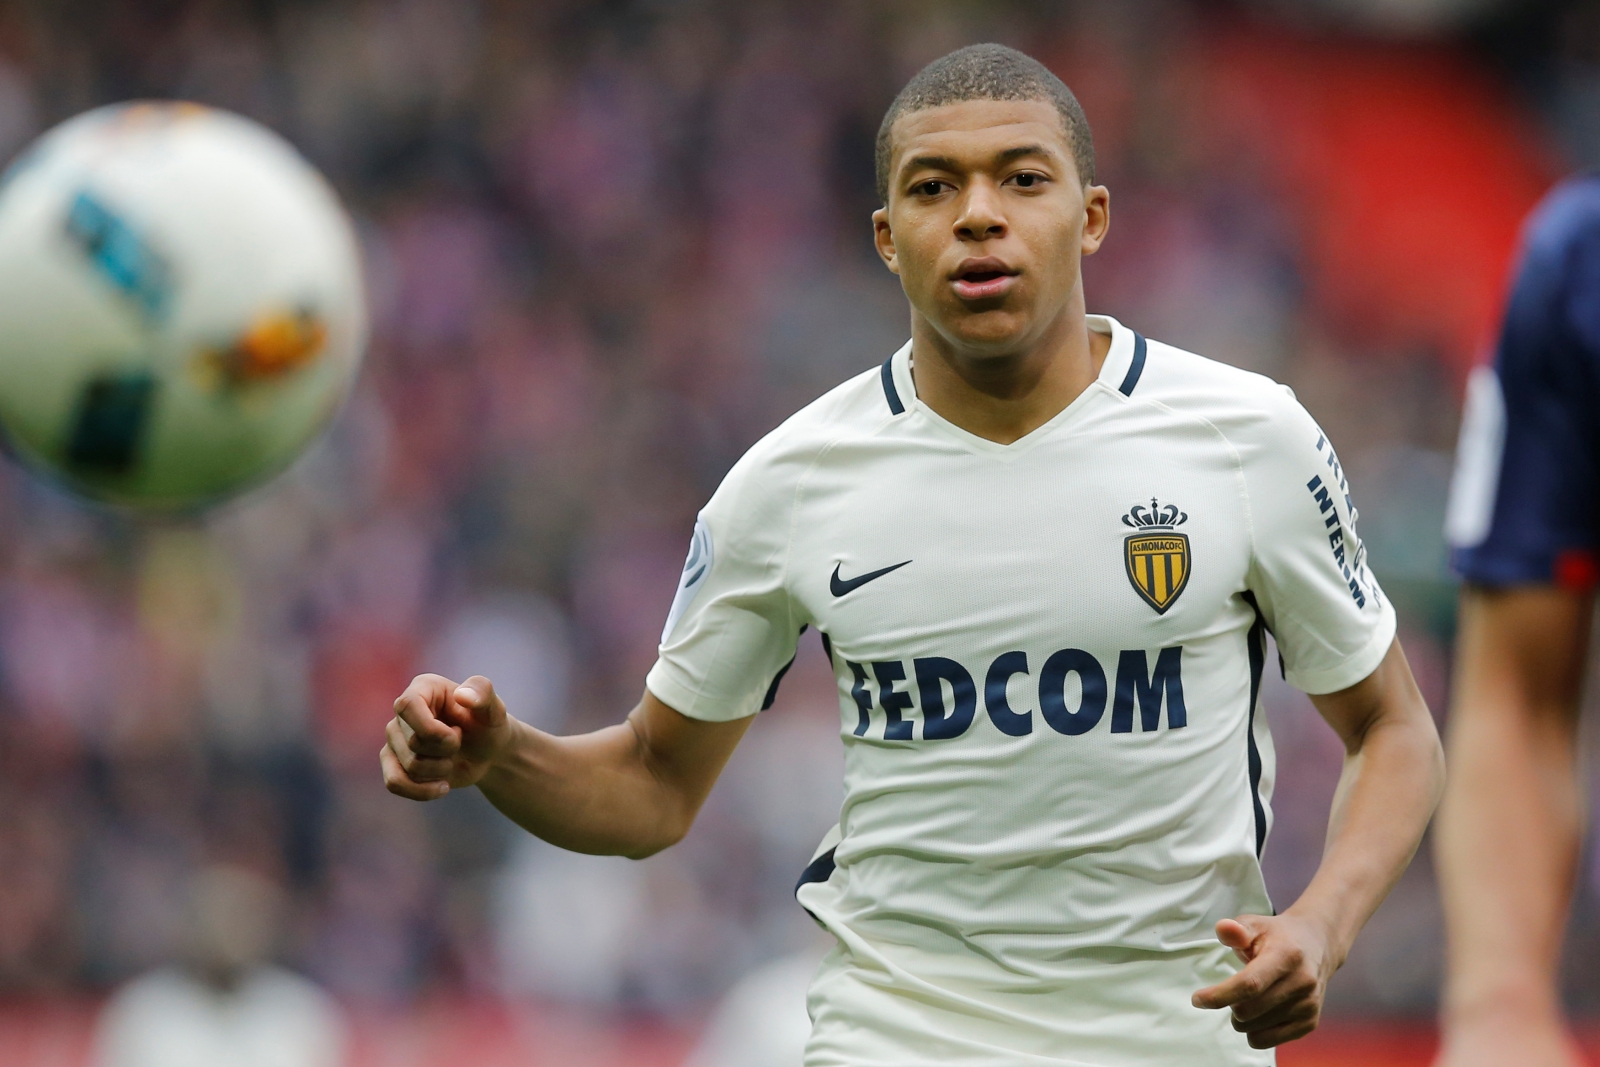 Arsene Wenger confirms Arsenal were very close to signing Kylian Mbappe